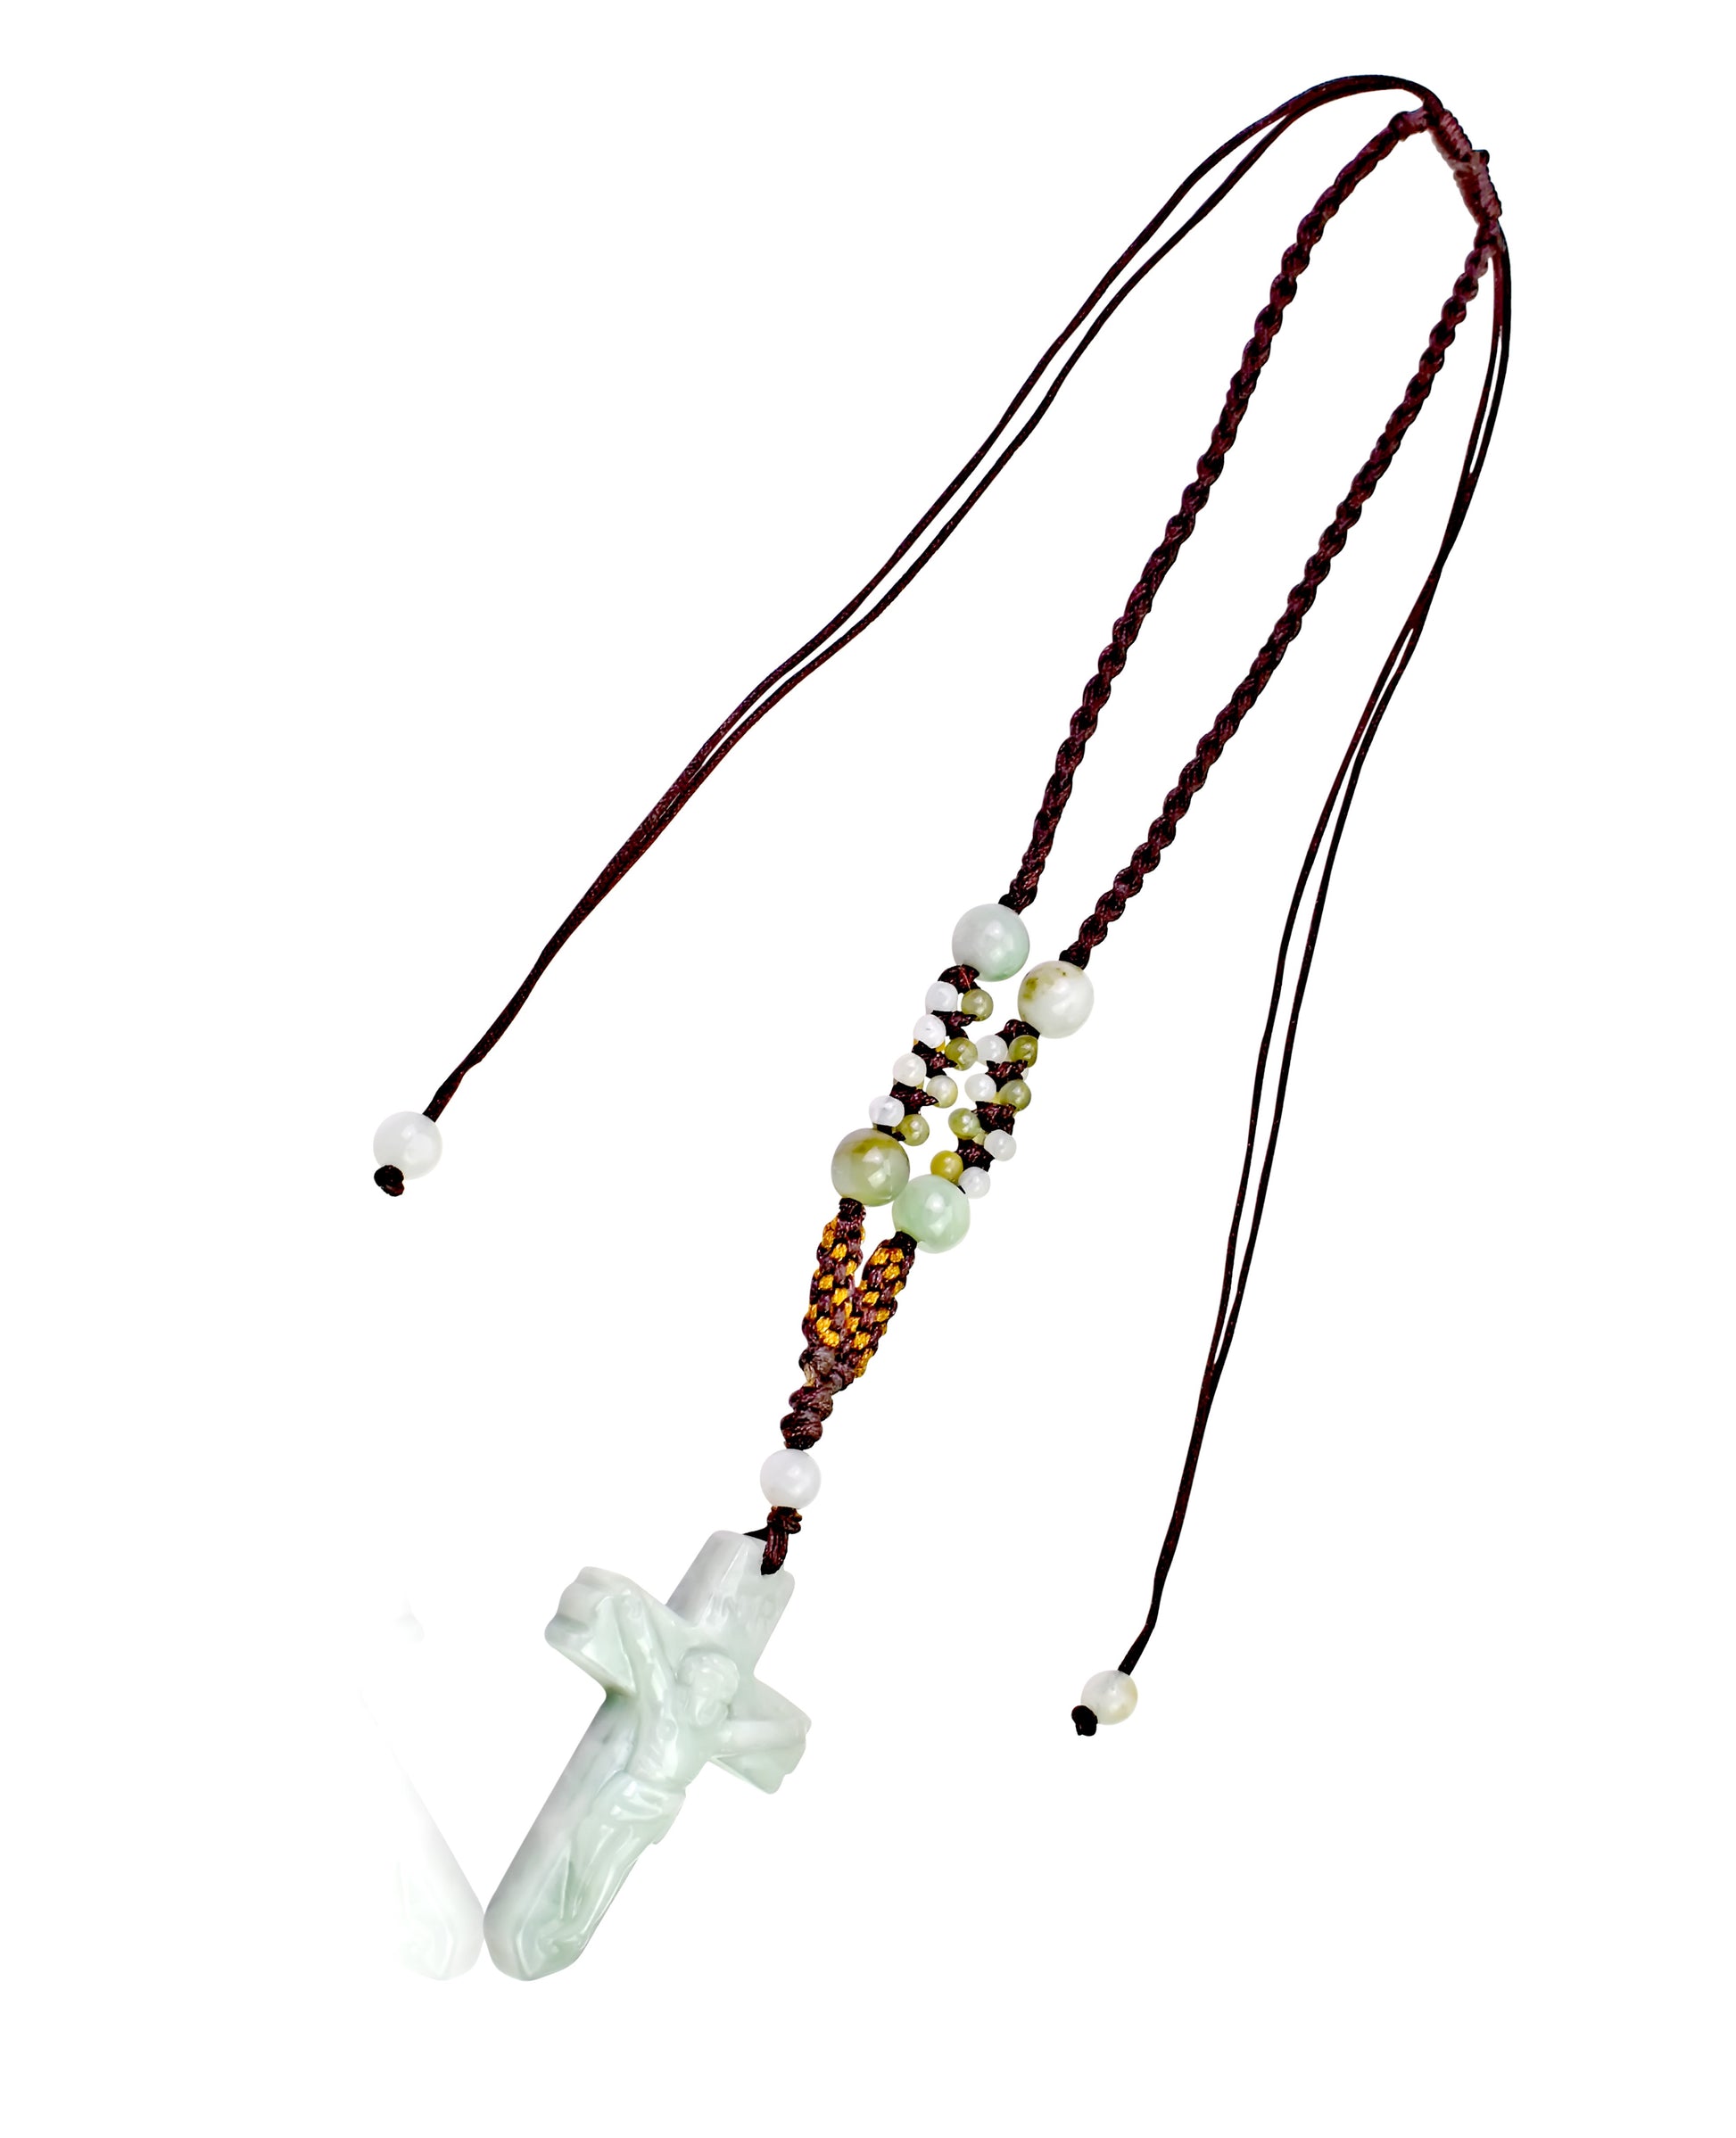 Make a Lasting Impression with the Cross Jade Necklace